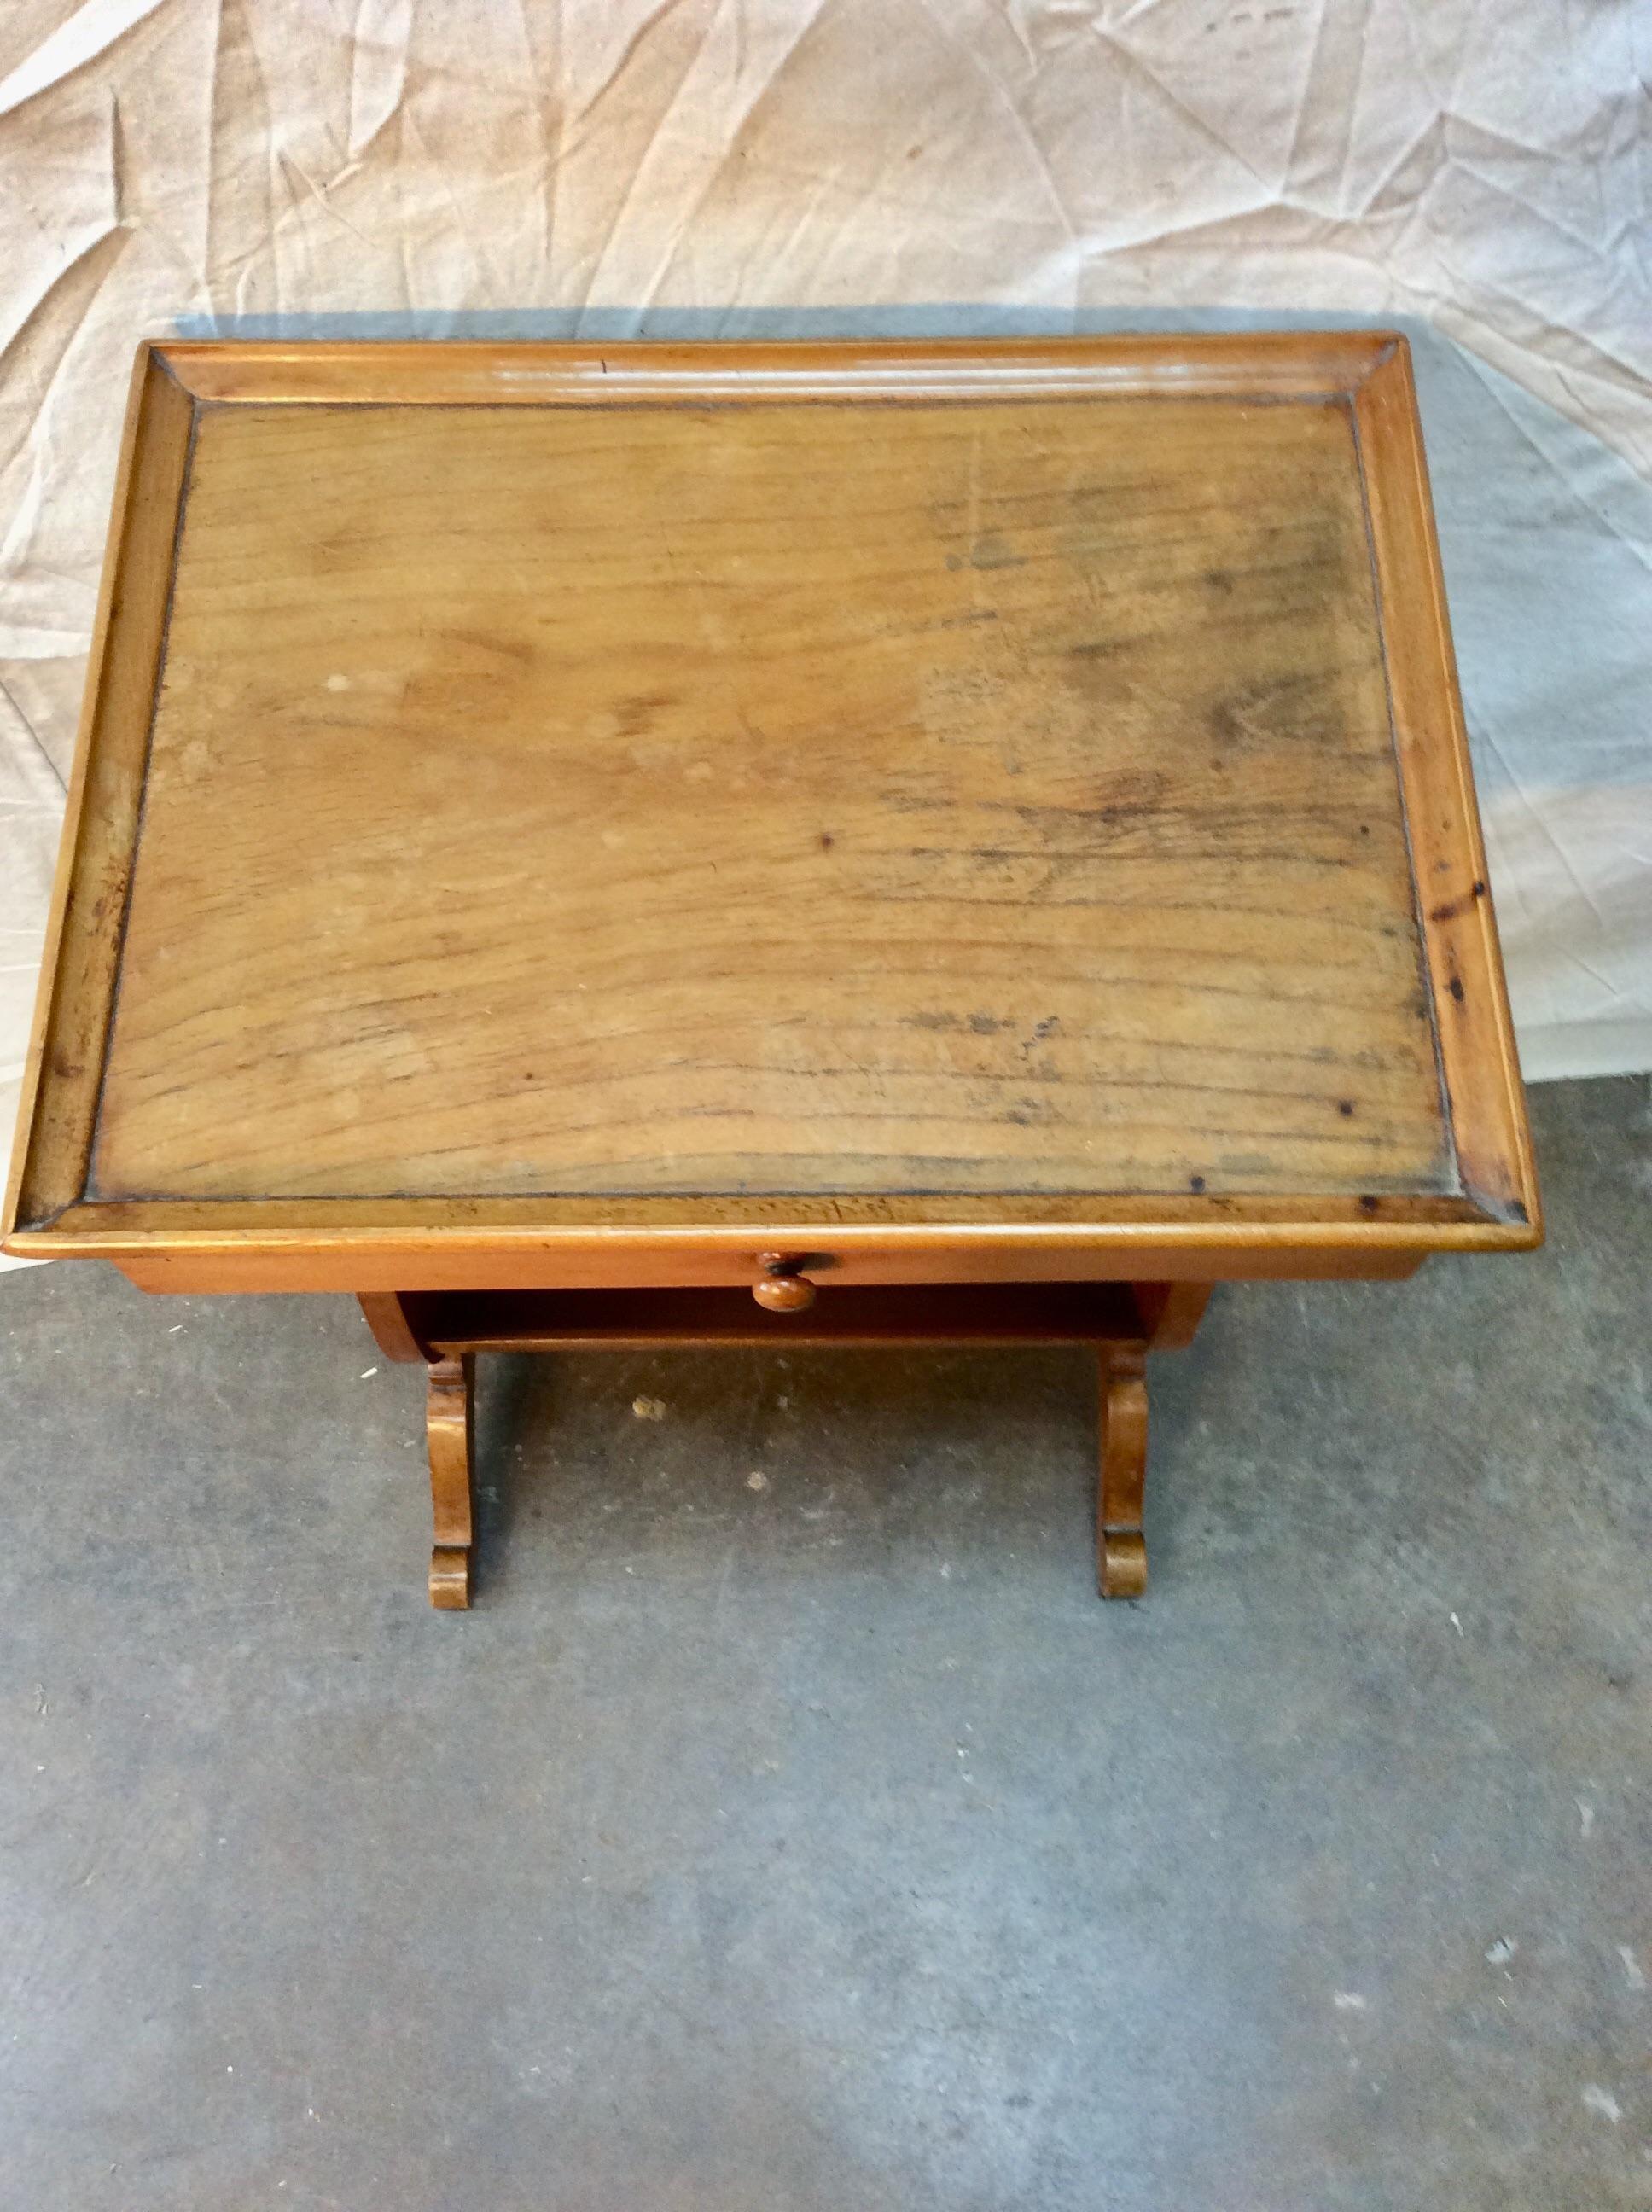 Found in the South of France, this petite early 20th century French Fruitwood Side Table is crafted with a raised edge top, one drawer adorned with a wood pull and a storage space on the bottom, possibly for a book or magazine. The two shapely